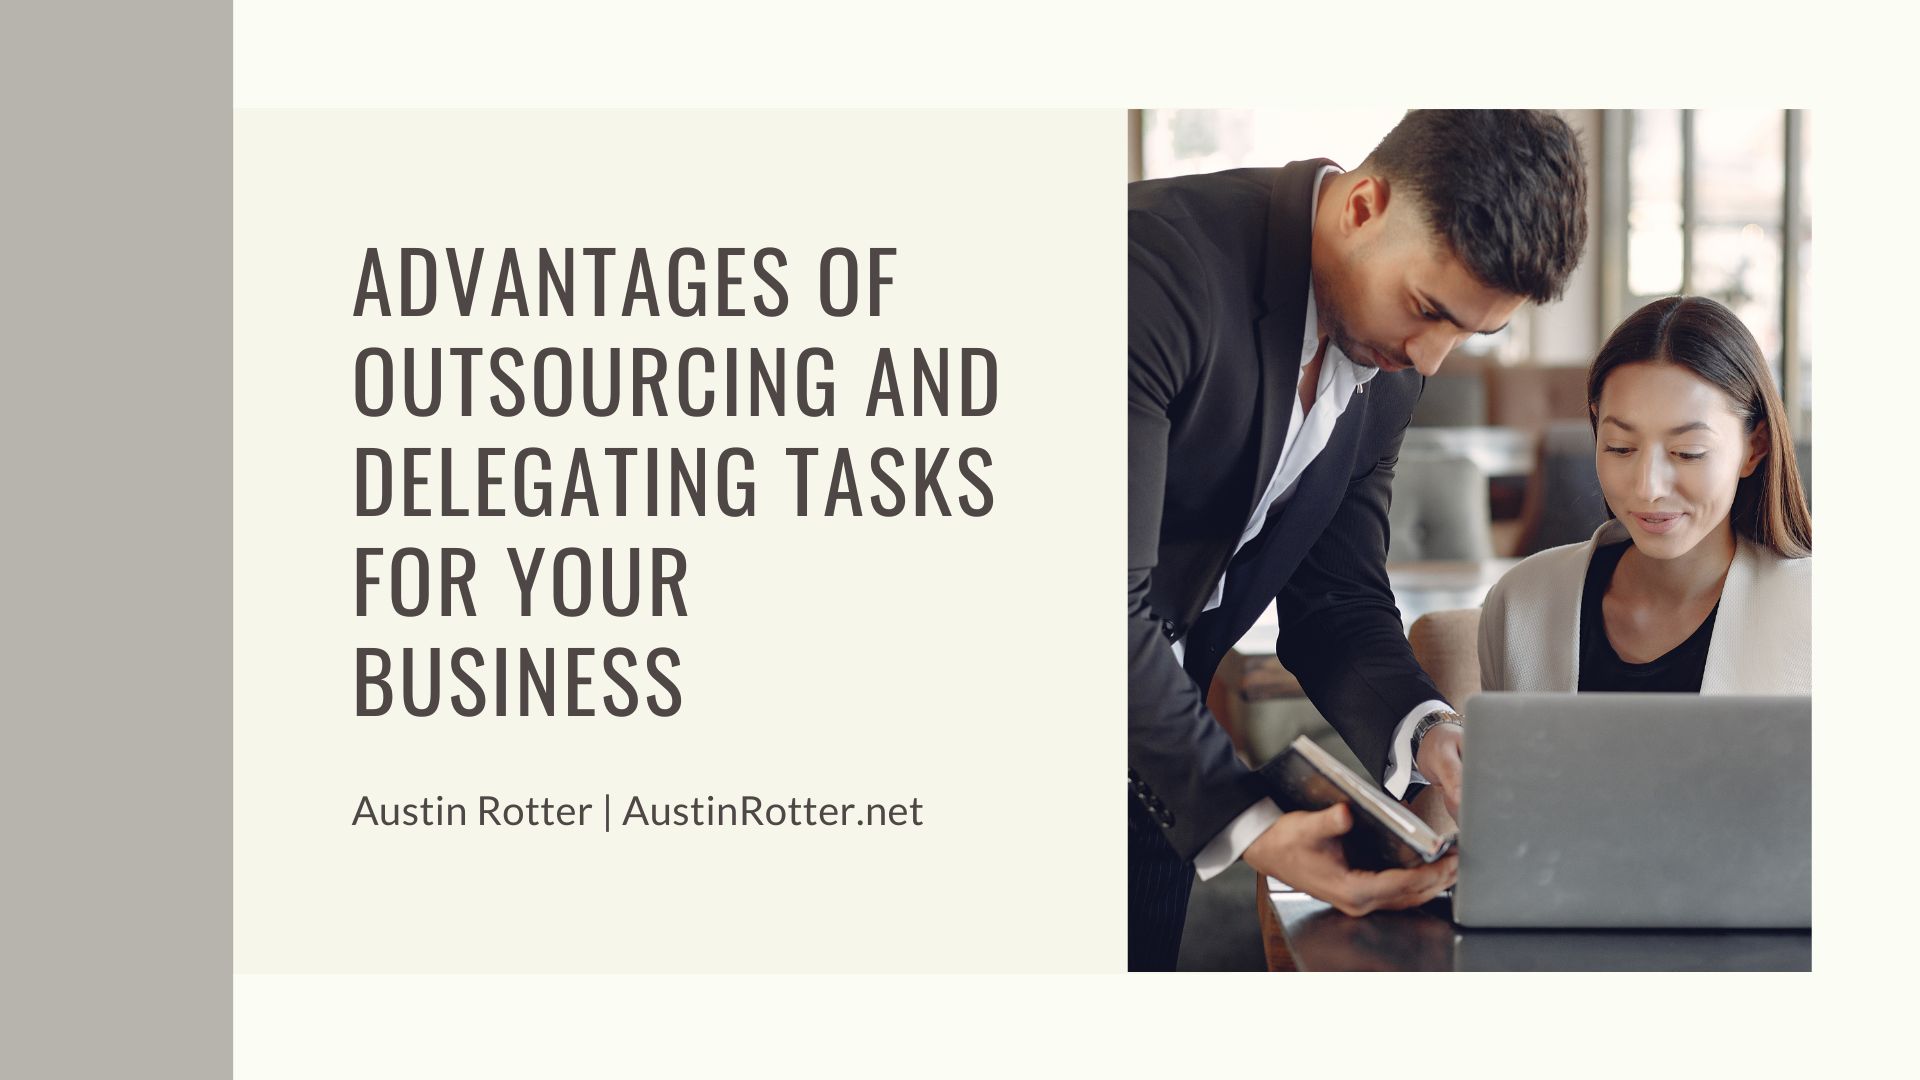 ADVANTAGES OF
OUTSOURCING AND
DELEGATING TASKS
FOR YOUR
BUSINESS

Austin Rotter | AustinRotter.net